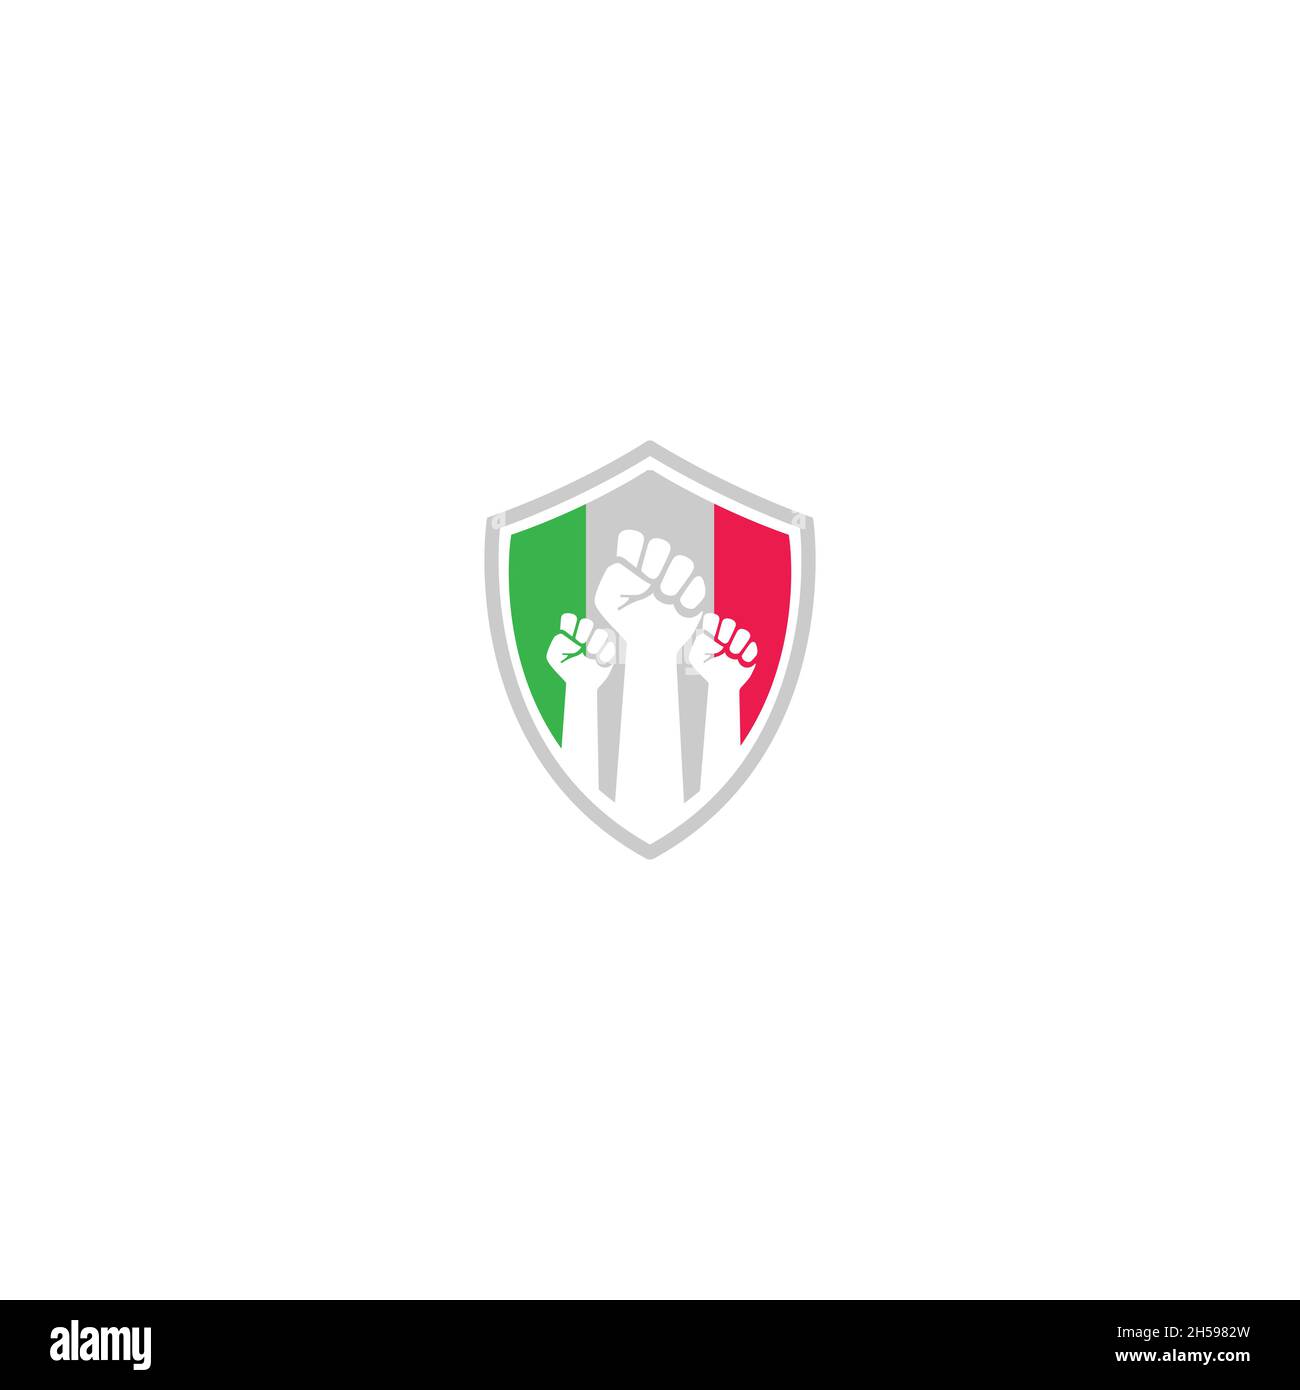 vector illustration. logo in the form of hands grasping justice, resistance. attorney and law. Stock Vector